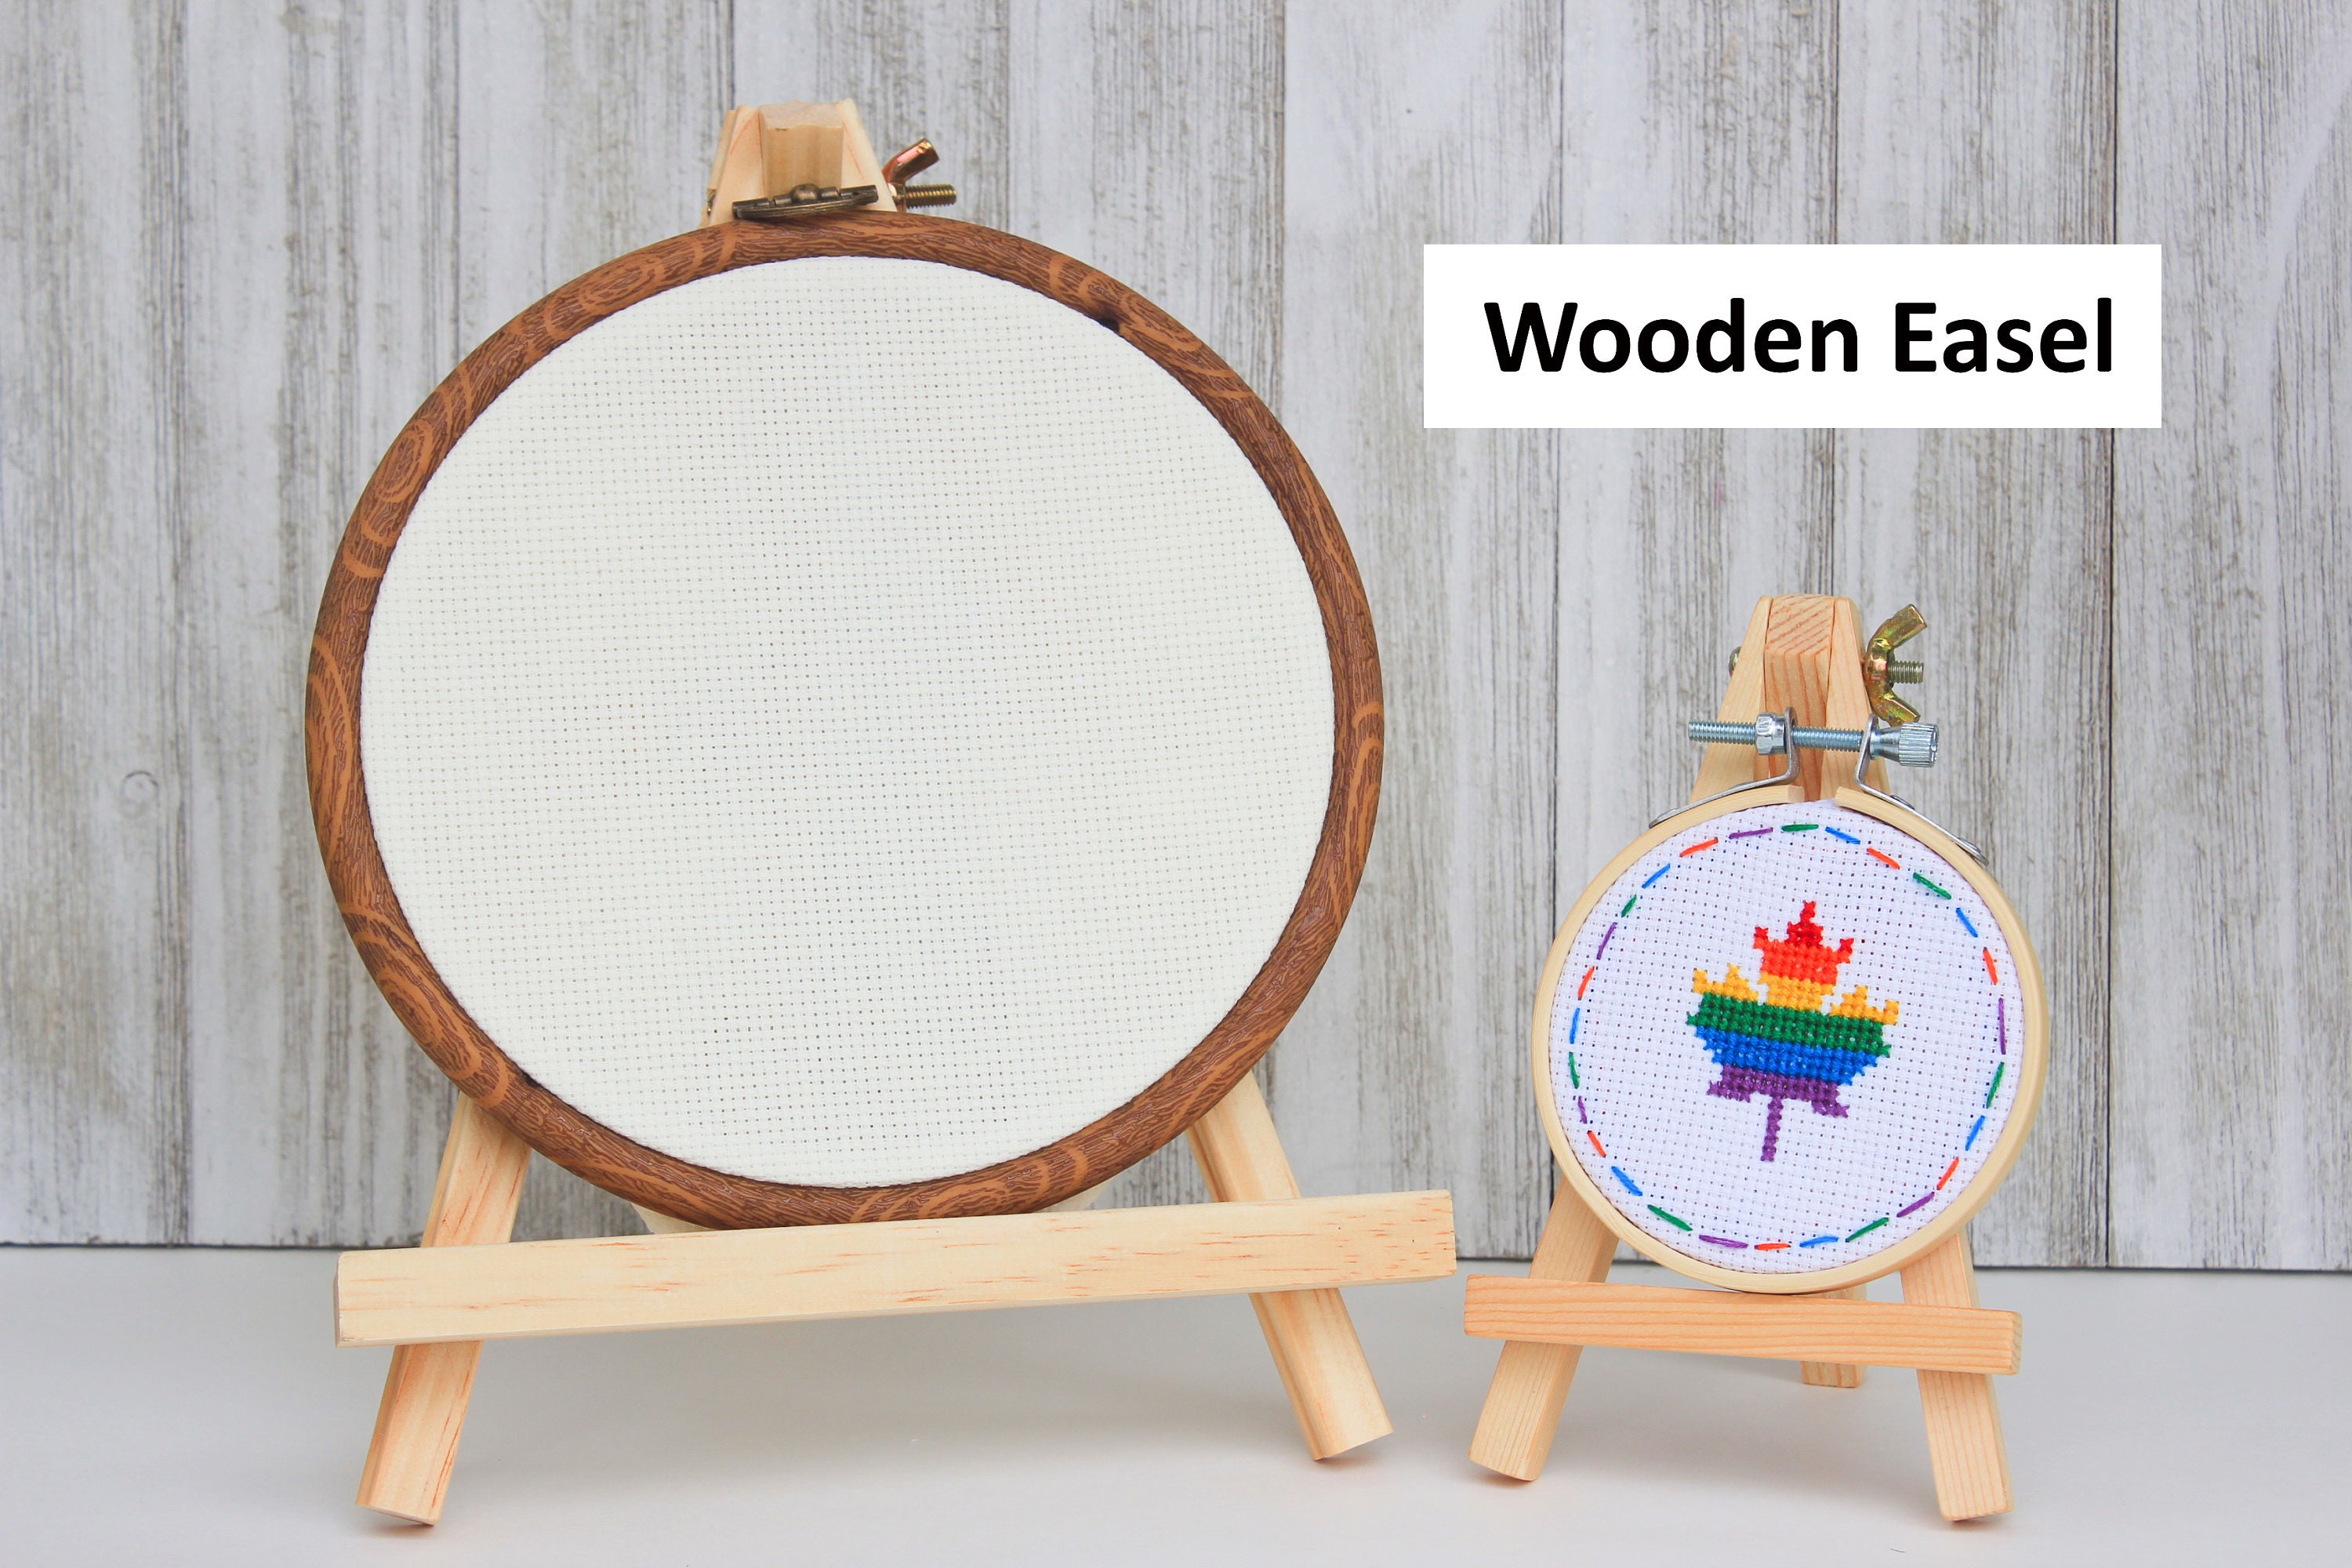 How to finish your embroidery hoop for display - Hobbies and Crafts